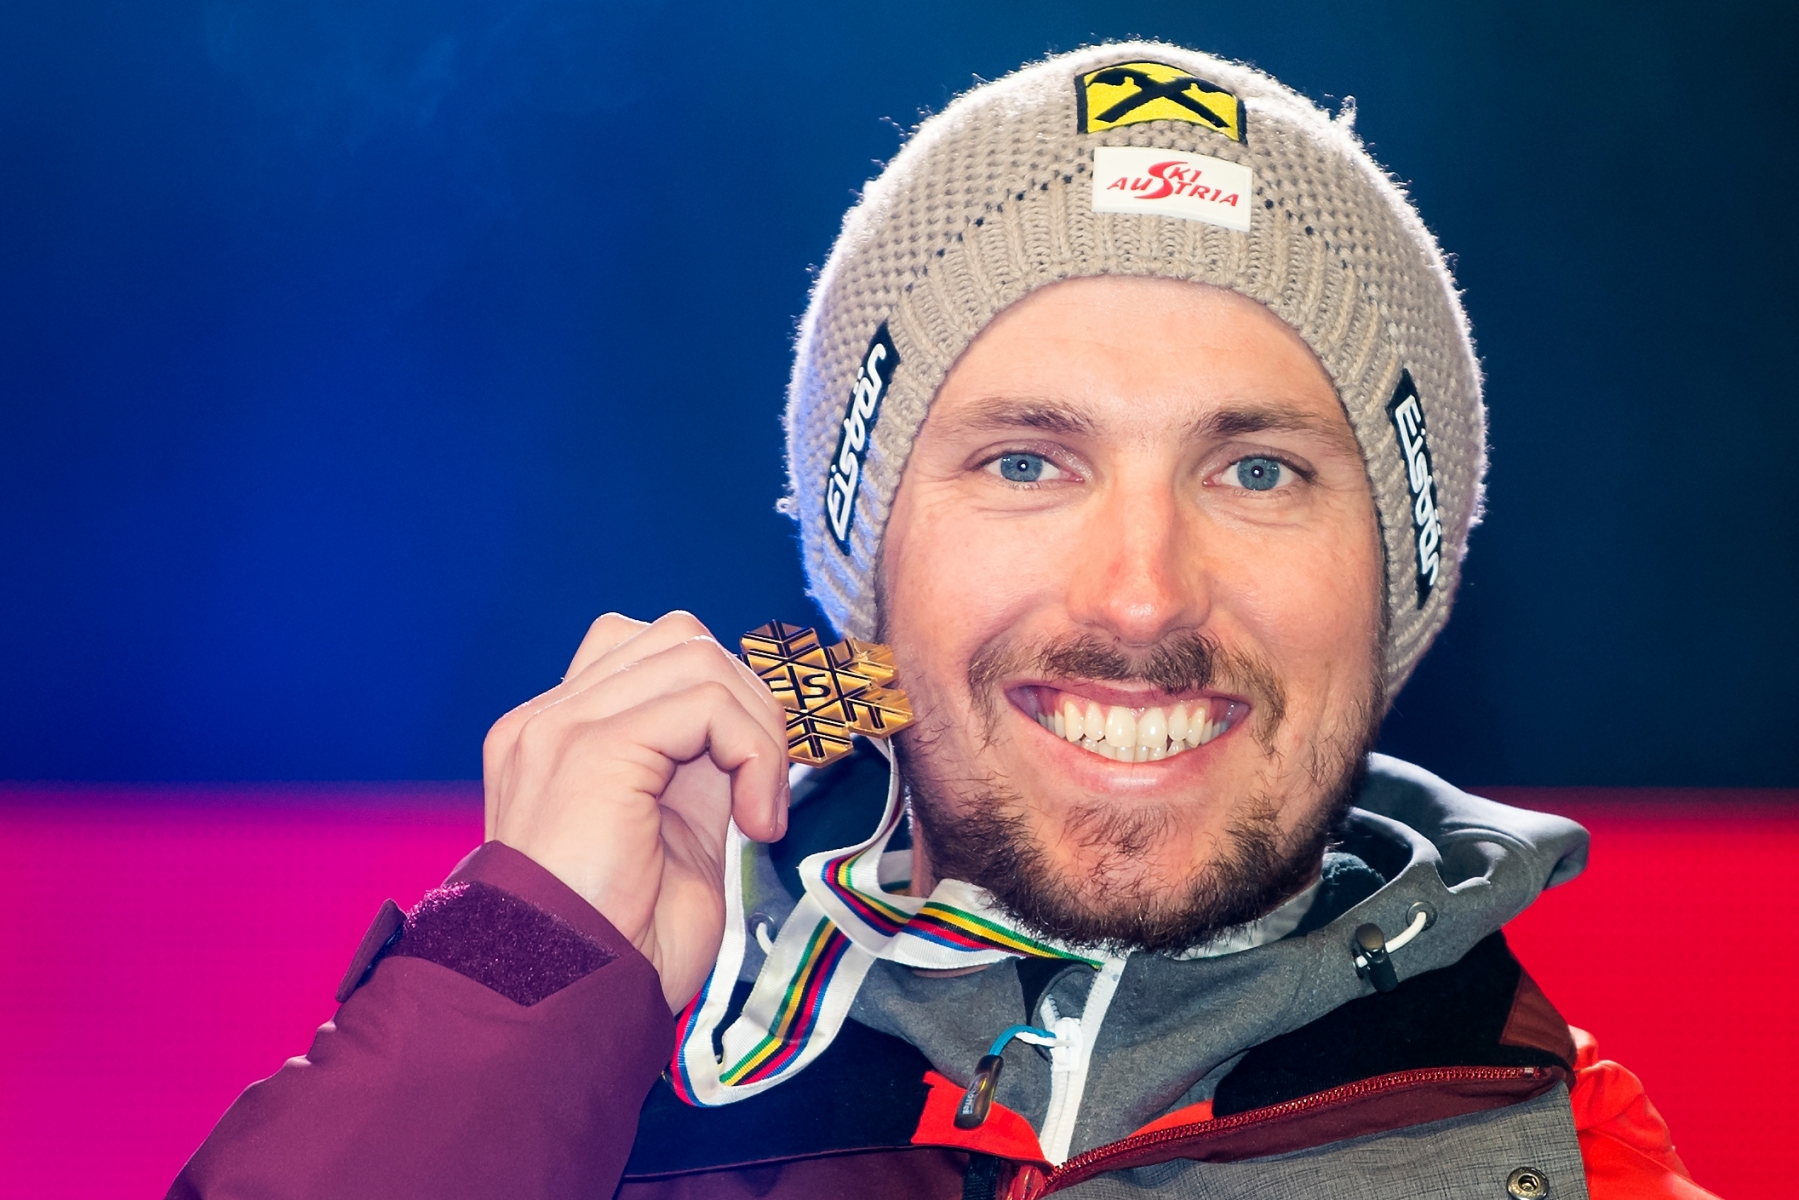 Gold medalist, Marcel Hirscher of Austria, poses during the medal ceremony of the men Giant Slalom at the 2017 FIS Alpine Skiing World Championships in St. Moritz, Switzerland, Friday, February 17, 2017. (KEYSTONE/Peter Schneider) SWITZERLAND ALPINE SKIING WORLDS MEN GIANT SLALOM